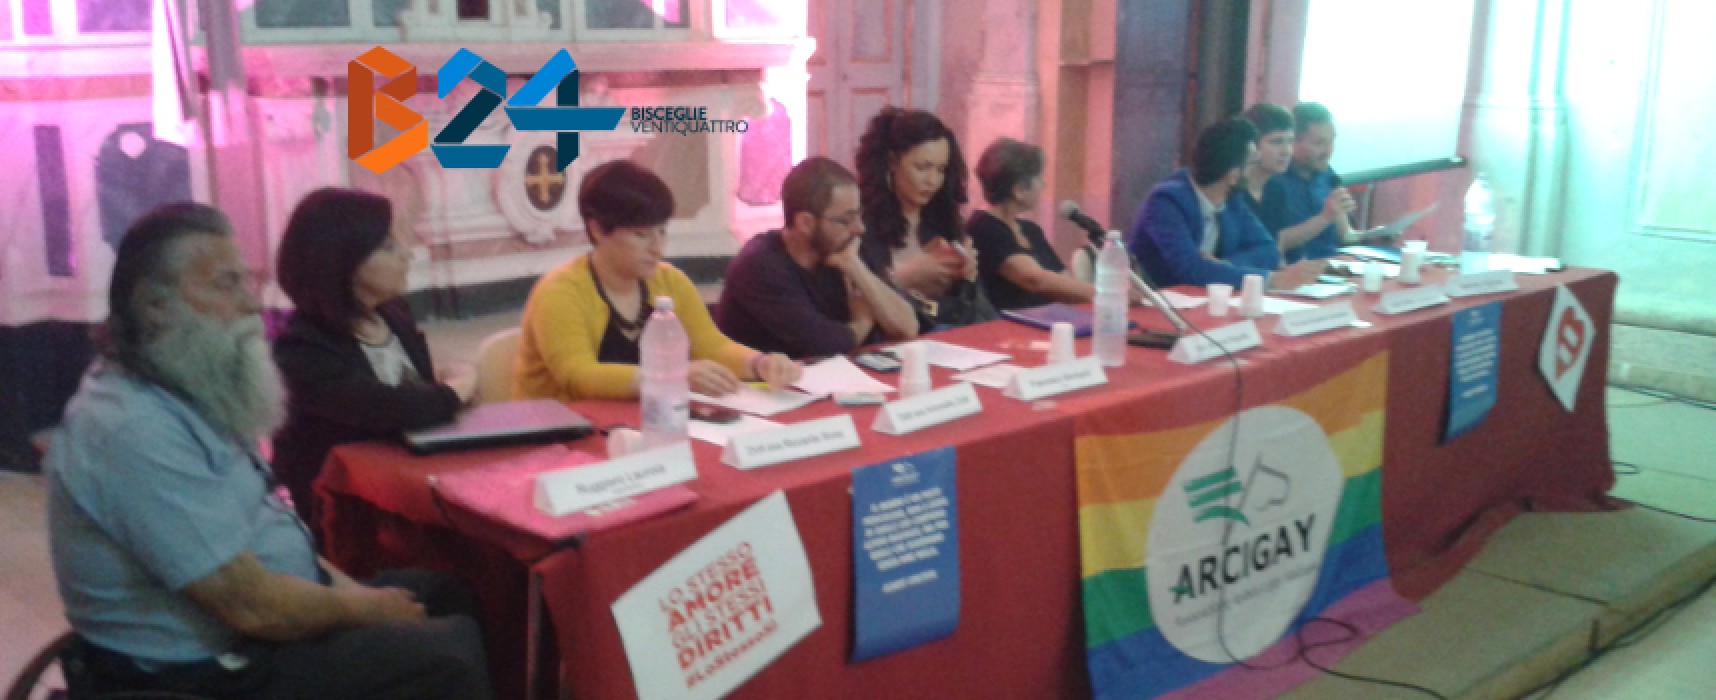 Arcigay Bat, “Be different without difference”: educare alle differenze per cancellare l’omofobia